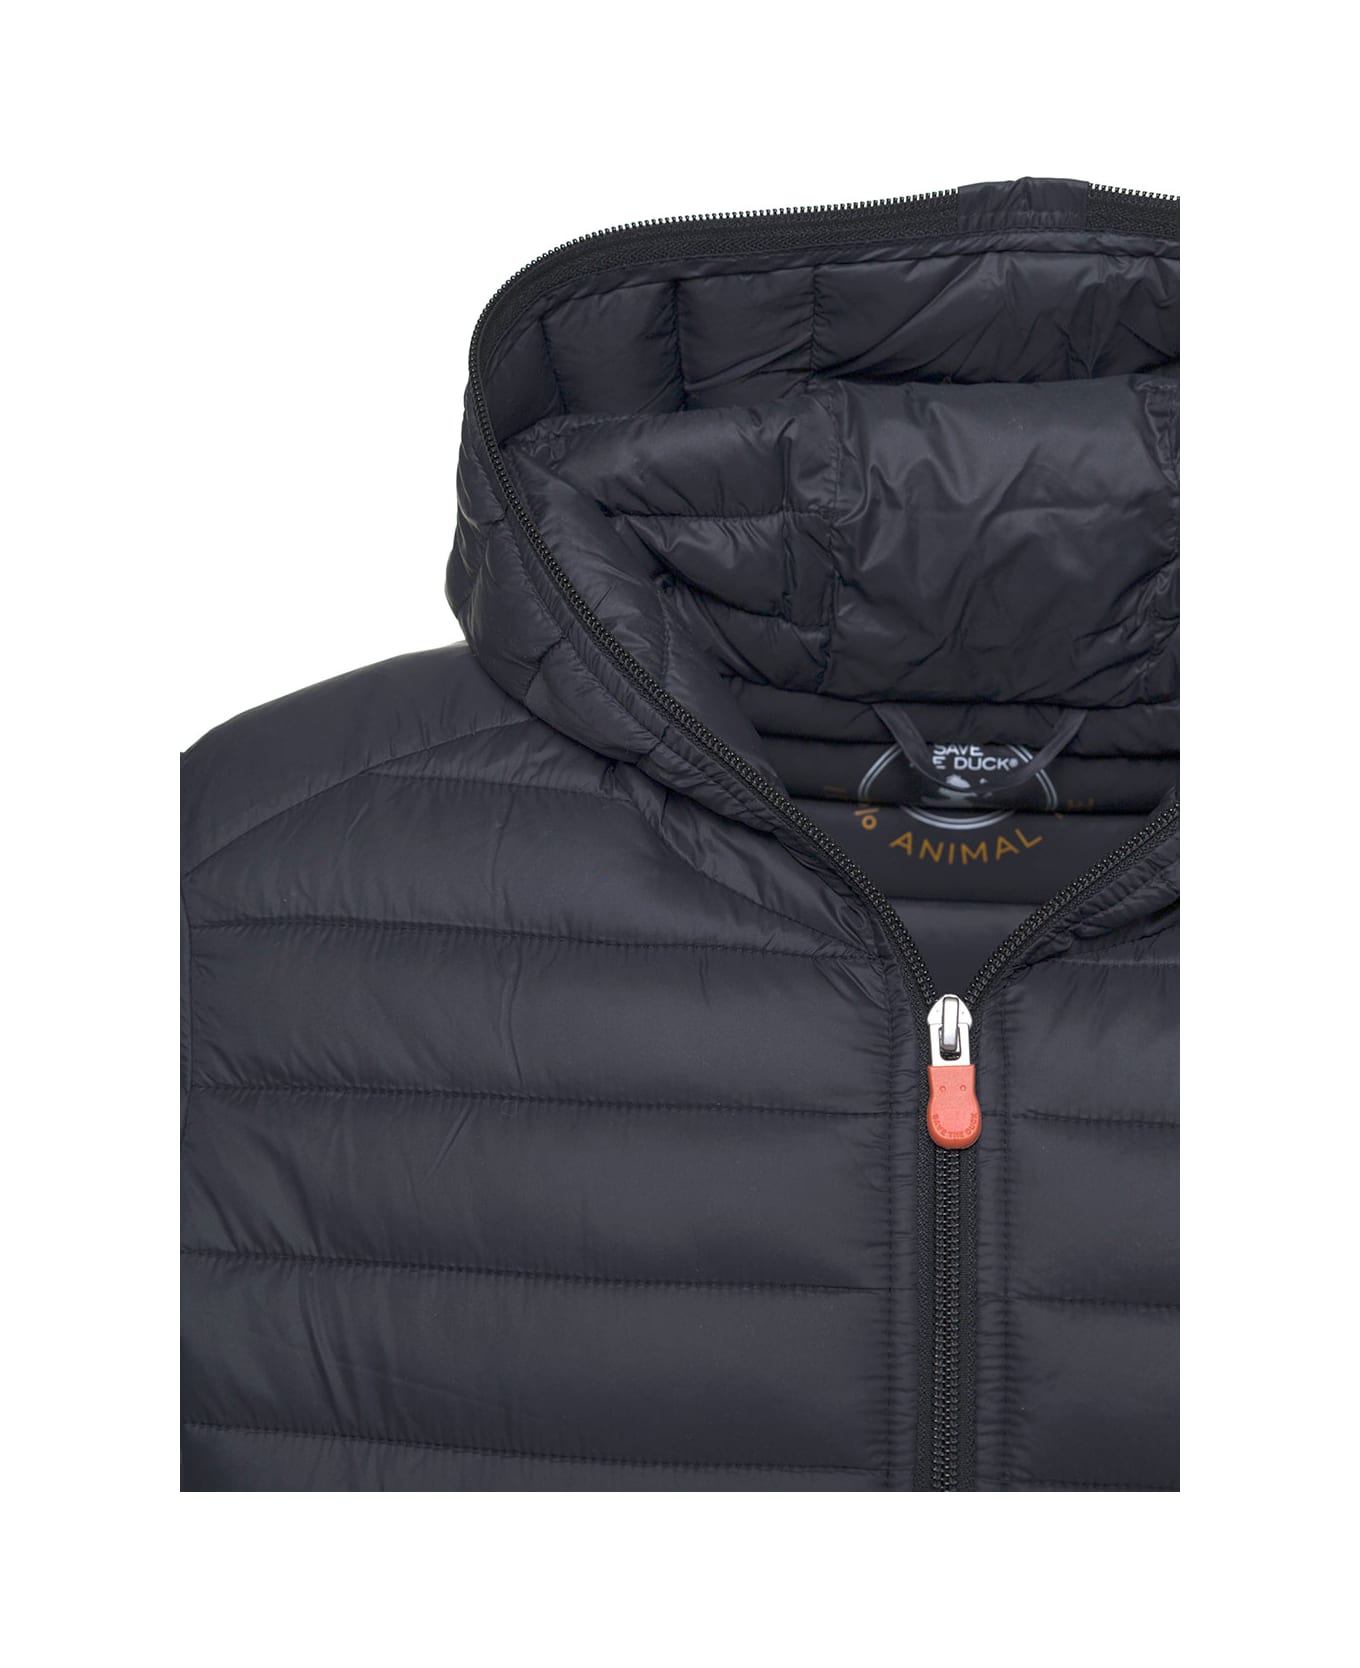 Save the Duck Ecological Black Quilted Nylon Down Jacket Man - Black